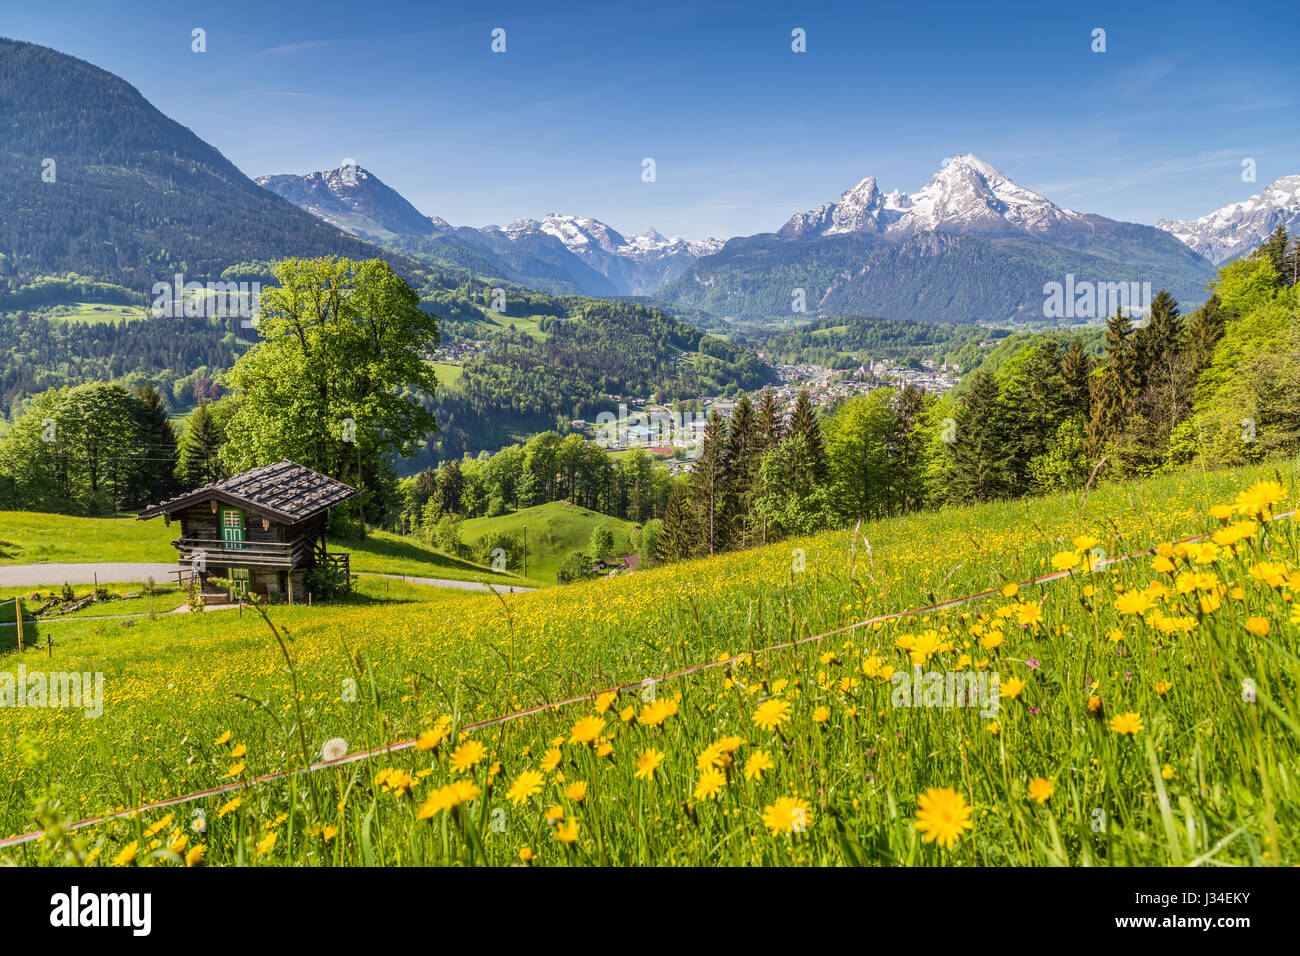 Beautiful view of idyllic mountain scenery in the Alps with traditional mountain chalet and fresh green mountain pastures with blooming flowers on a s Stock Photo